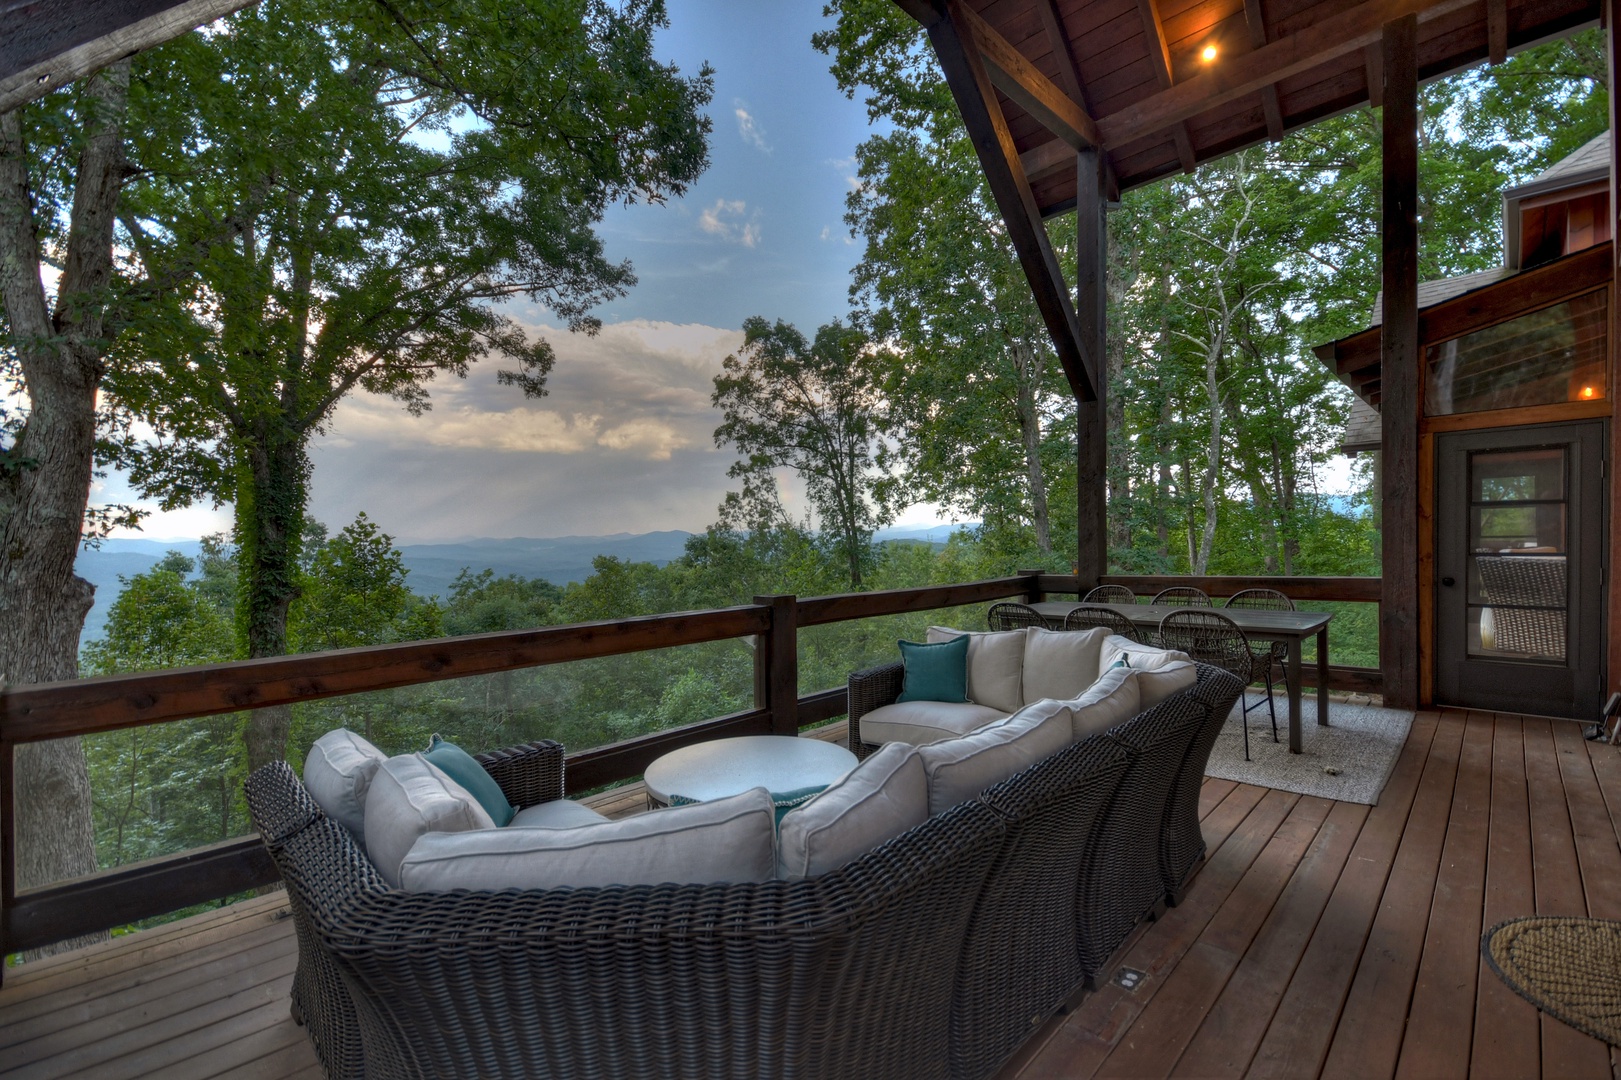 Heavenly Day - Entry Level Deck Seating with Forest and Mountain Views